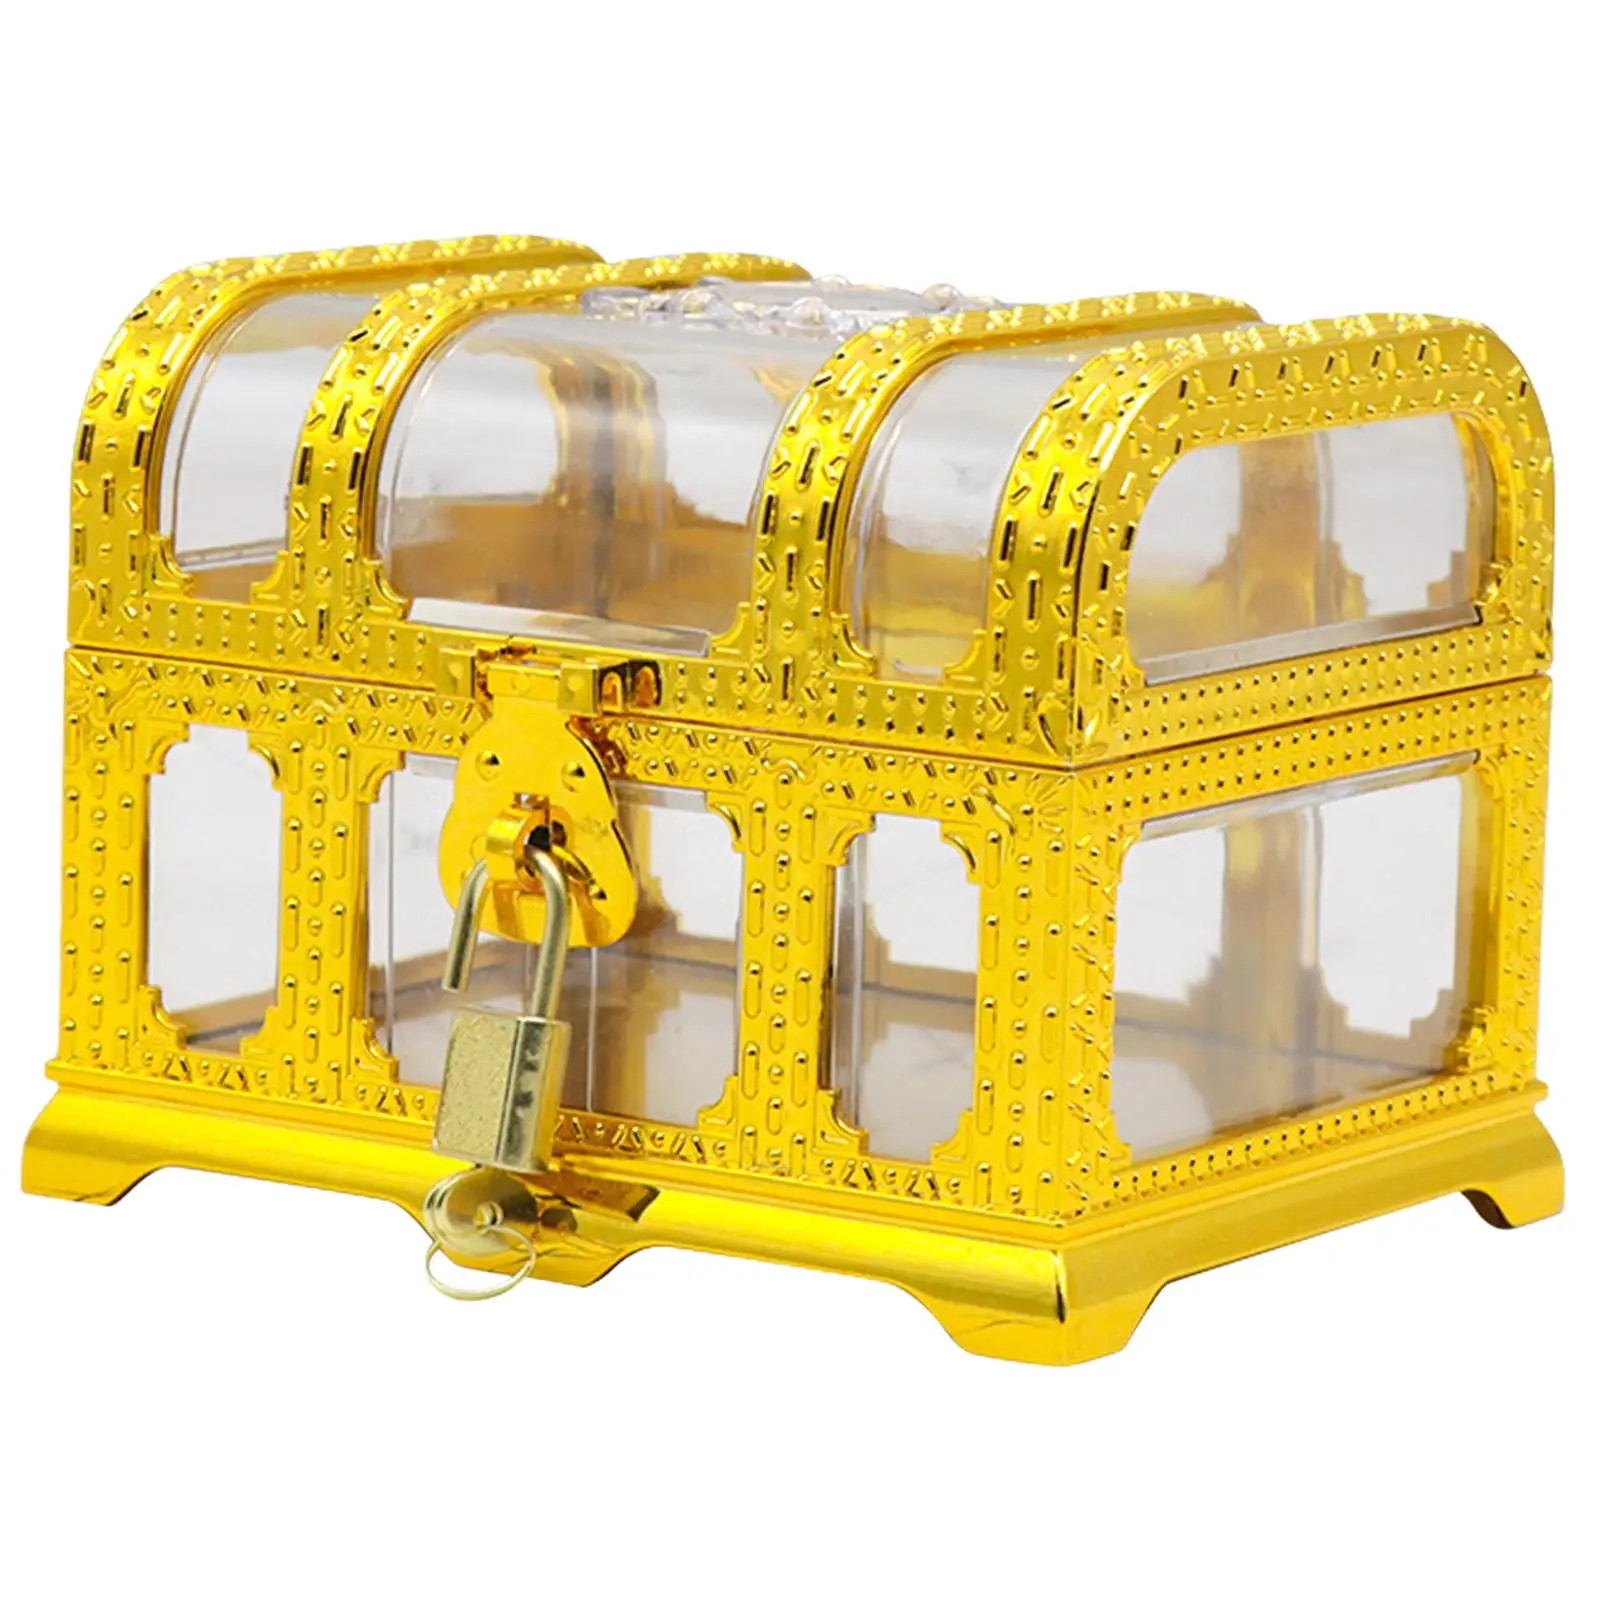 Treasure Chest Collection Storage Box Gift Box with Lock & Keys Piggy Bank Jewelry Organizer Goodie Bags for Kids Party Favors